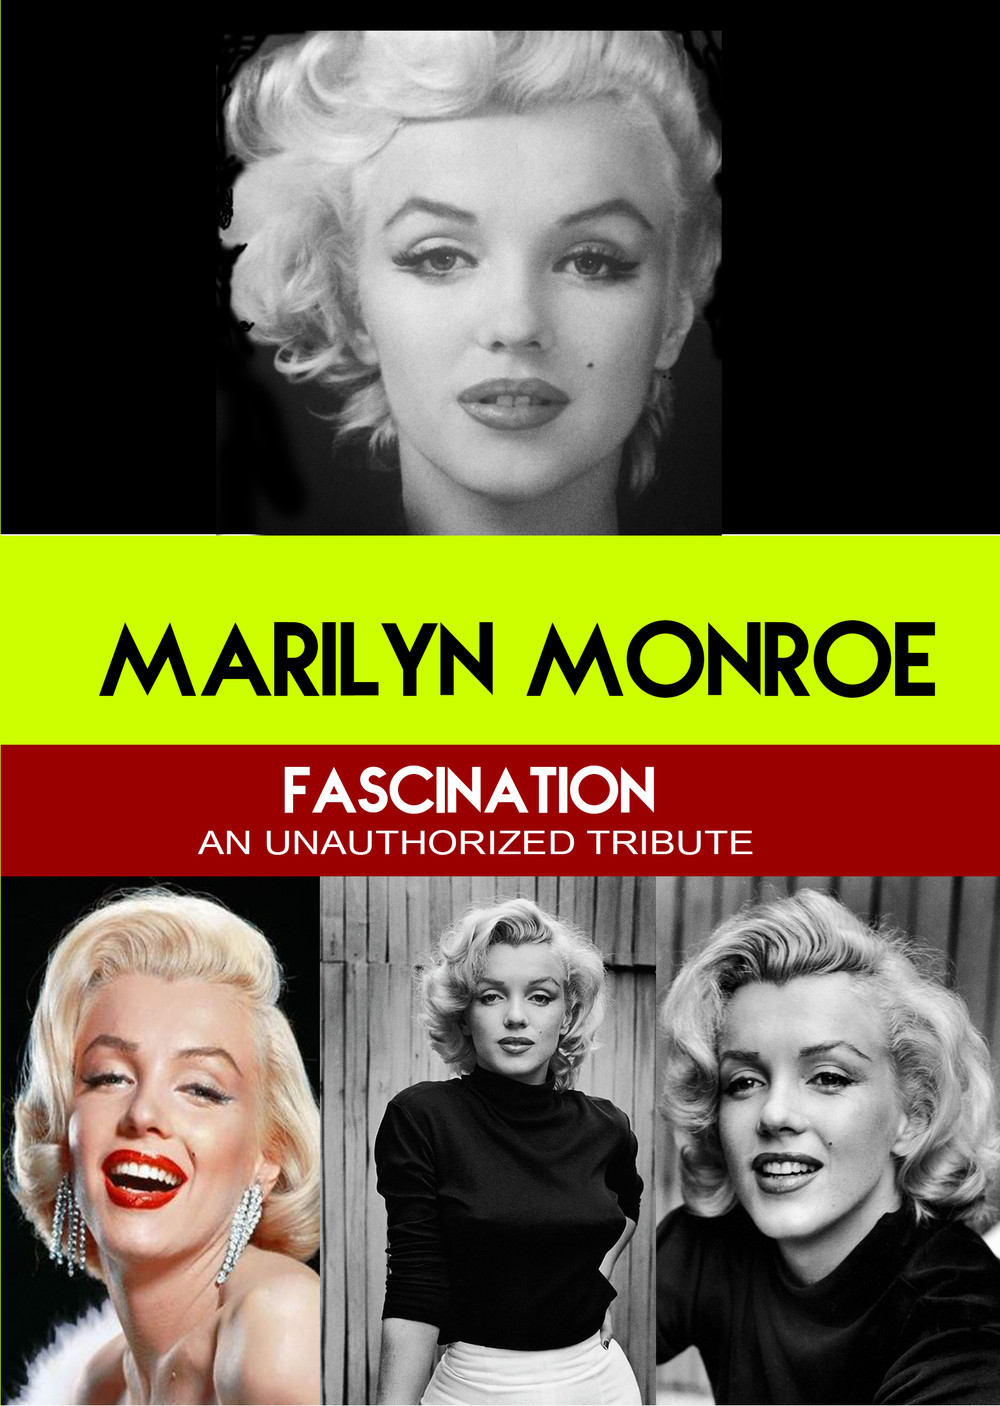 L7802 - Marilyn Monroe - Fascination An Unauthorized Tribute